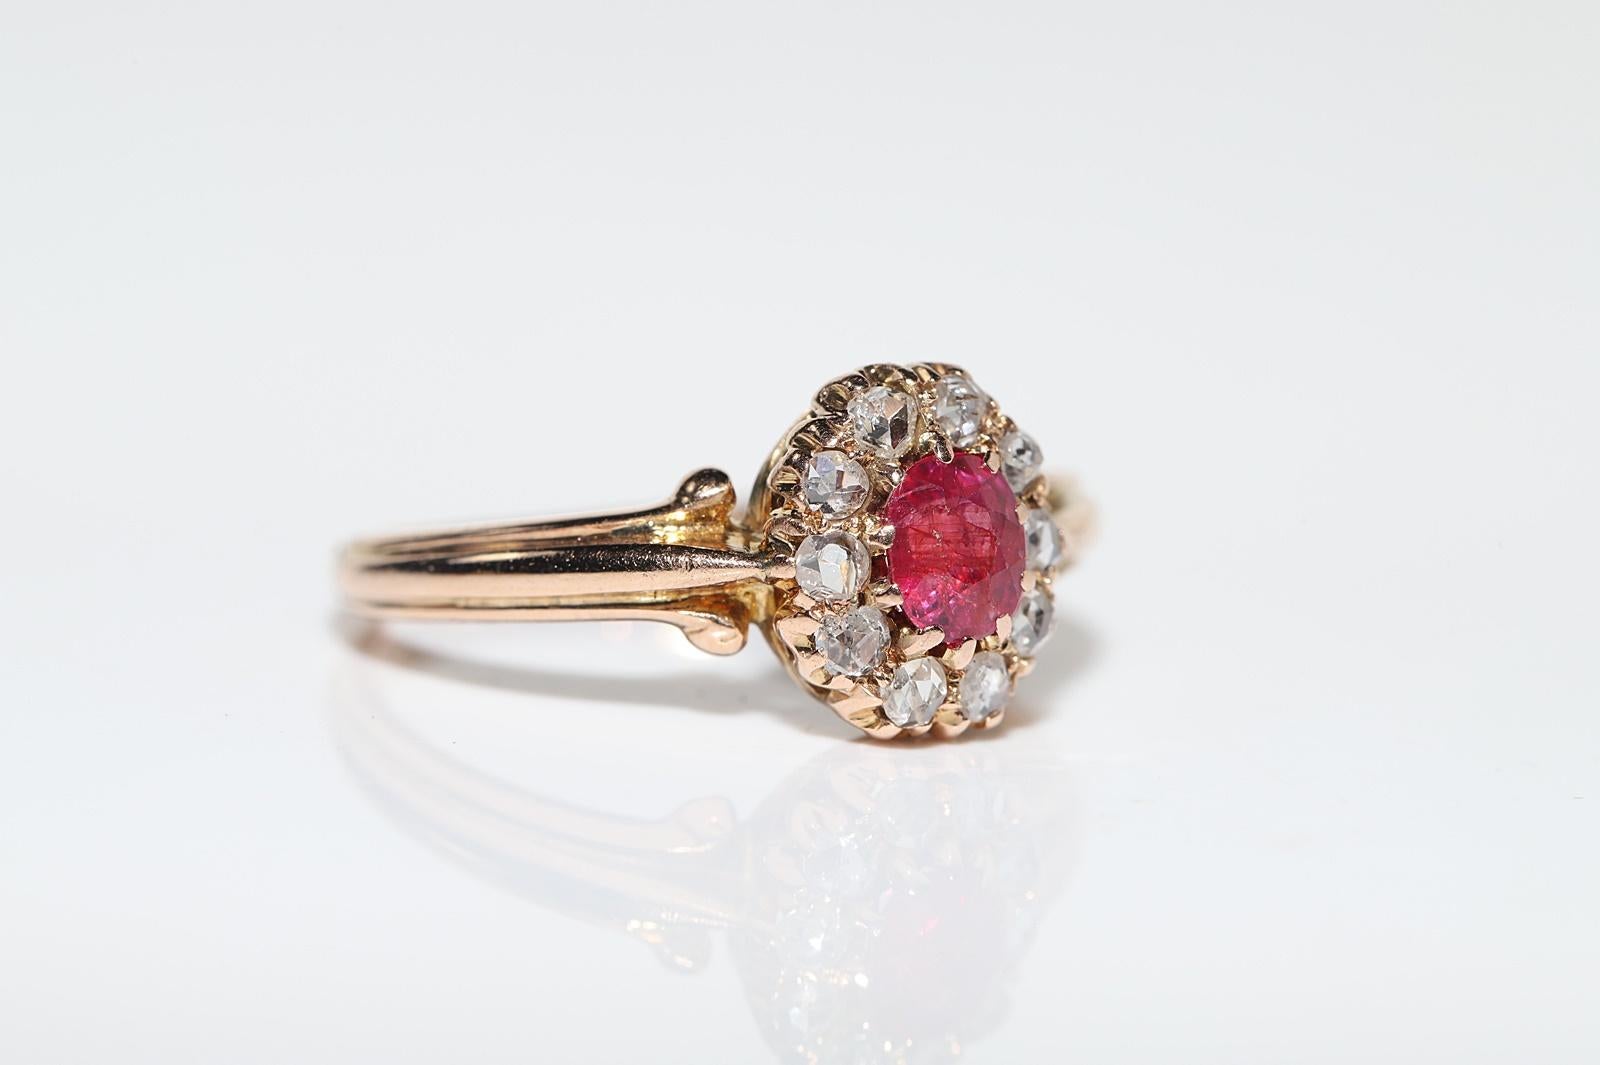 Women's Antique Circa 1900s 14k Gold Natural Rose Cut Diamond And Ruby Decorated Ring